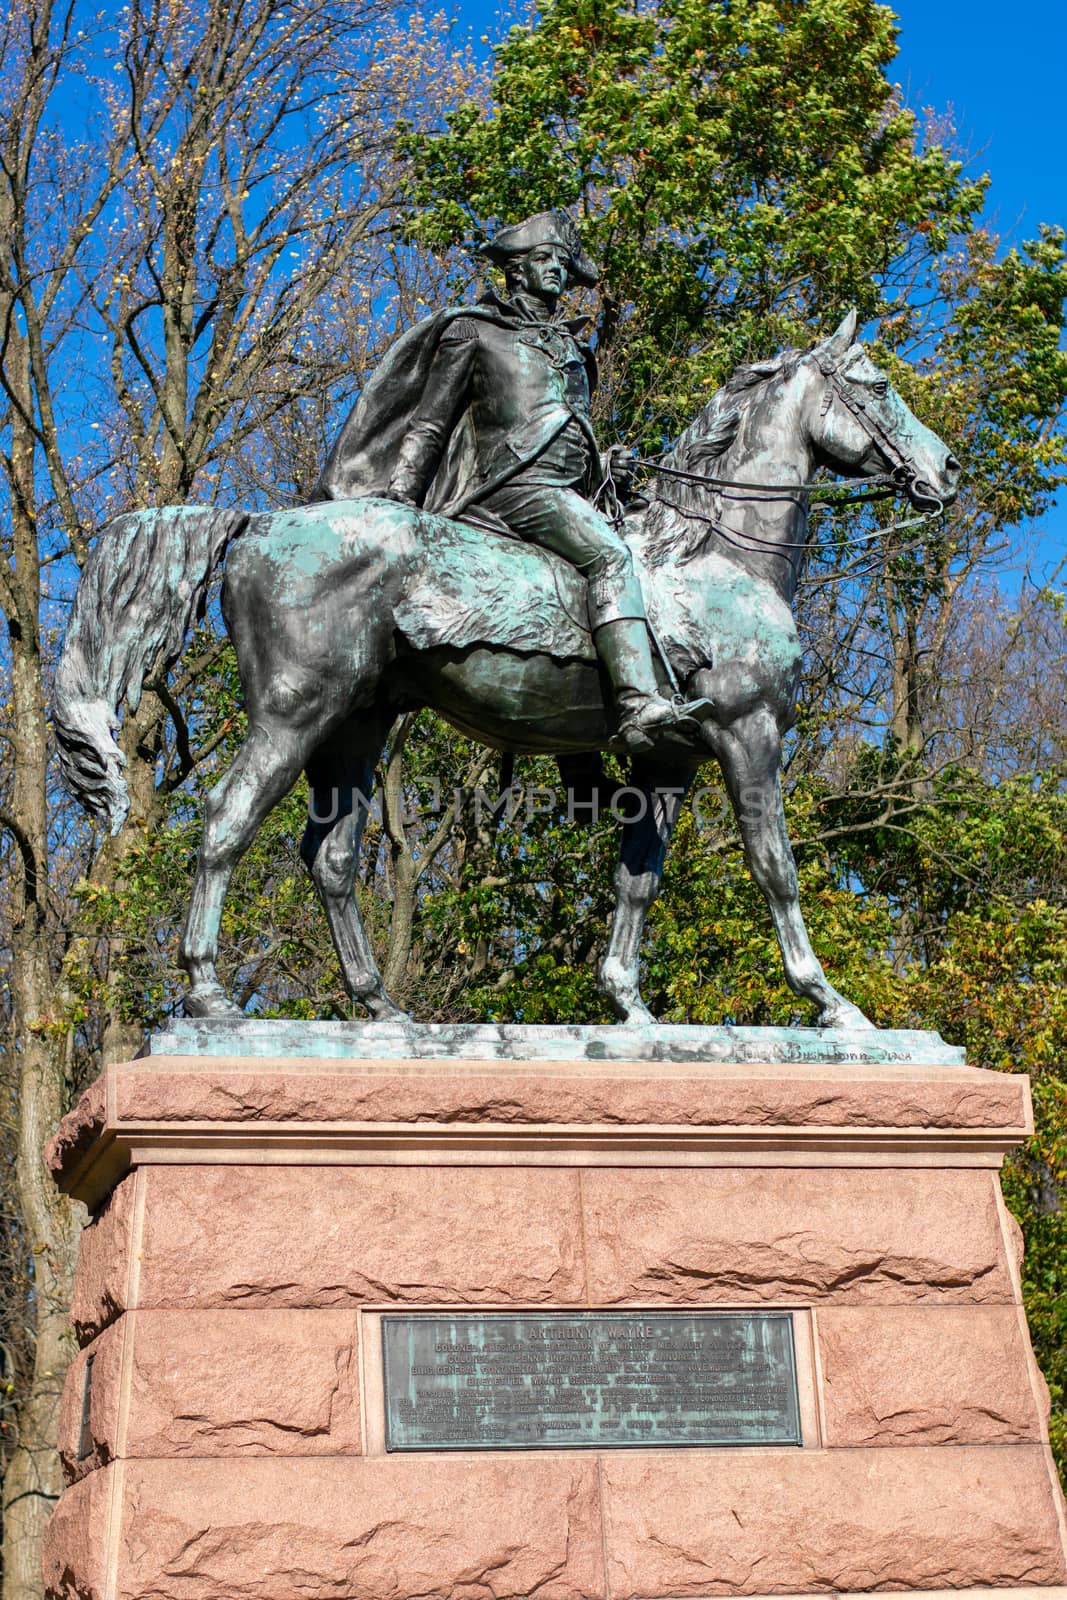 The Statue of General Anthony Wayne on his horse at Valley Forge National Historical Park